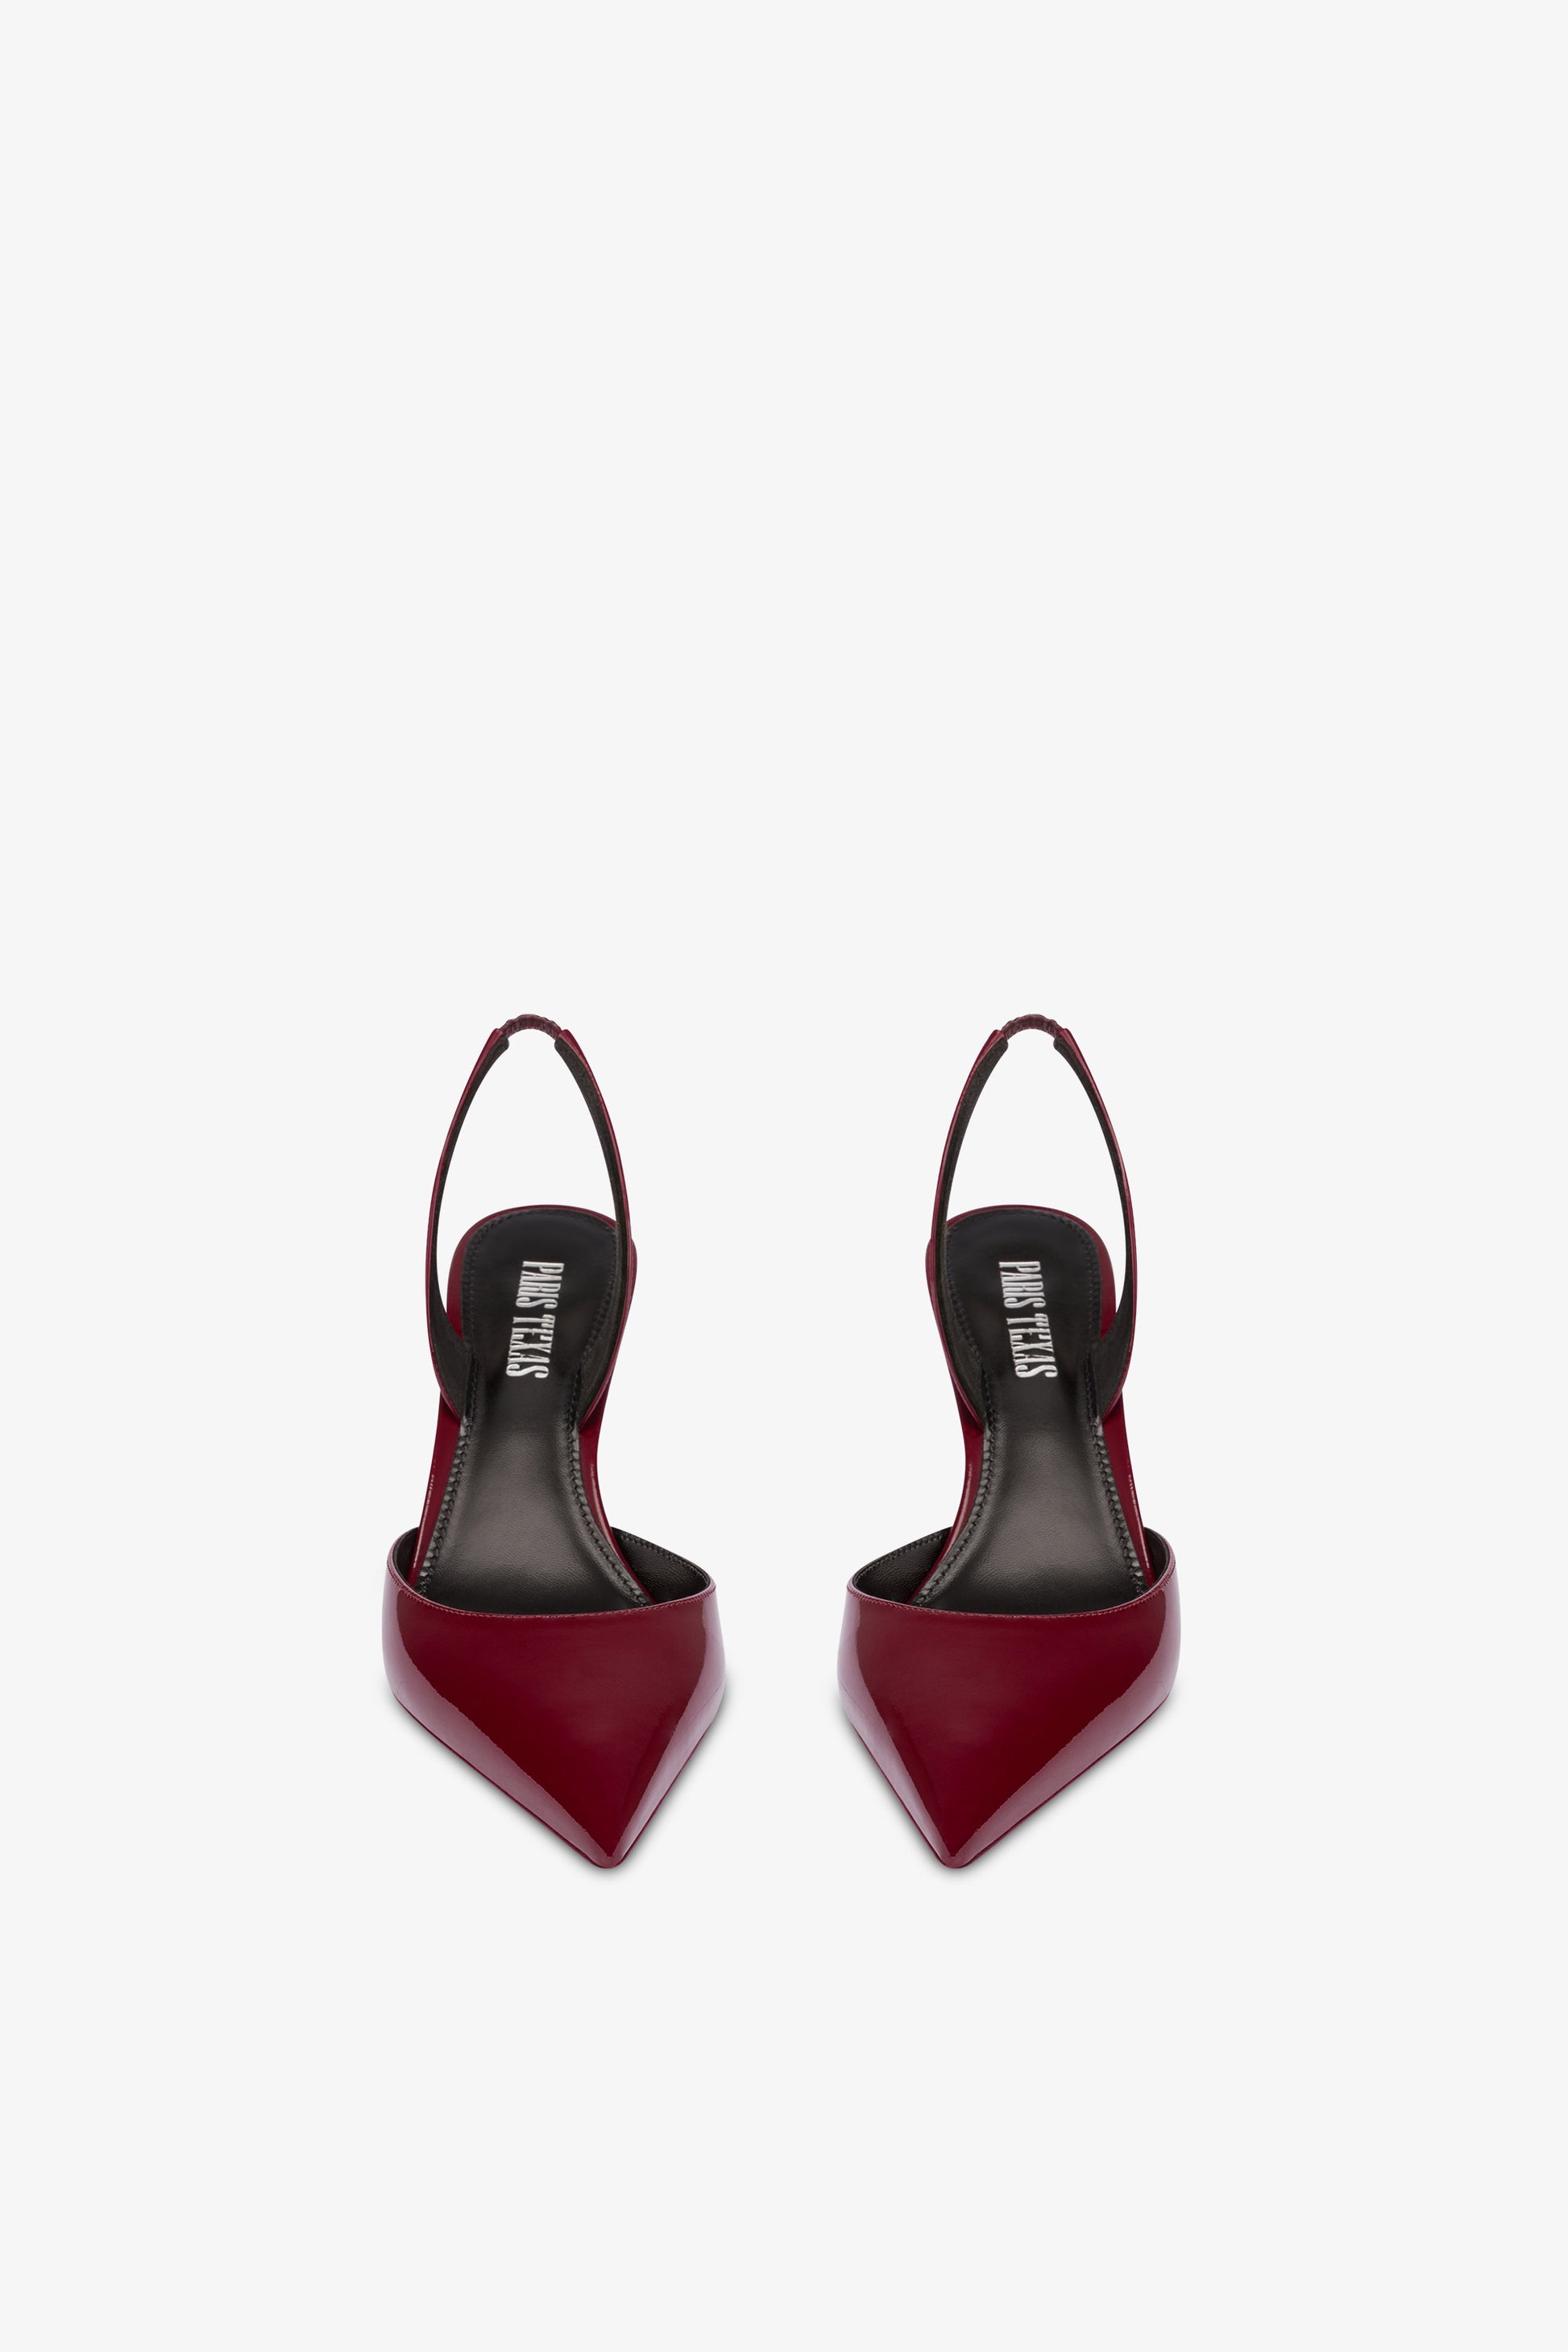 Long, pointed slingbacks in patent rouge noir leather